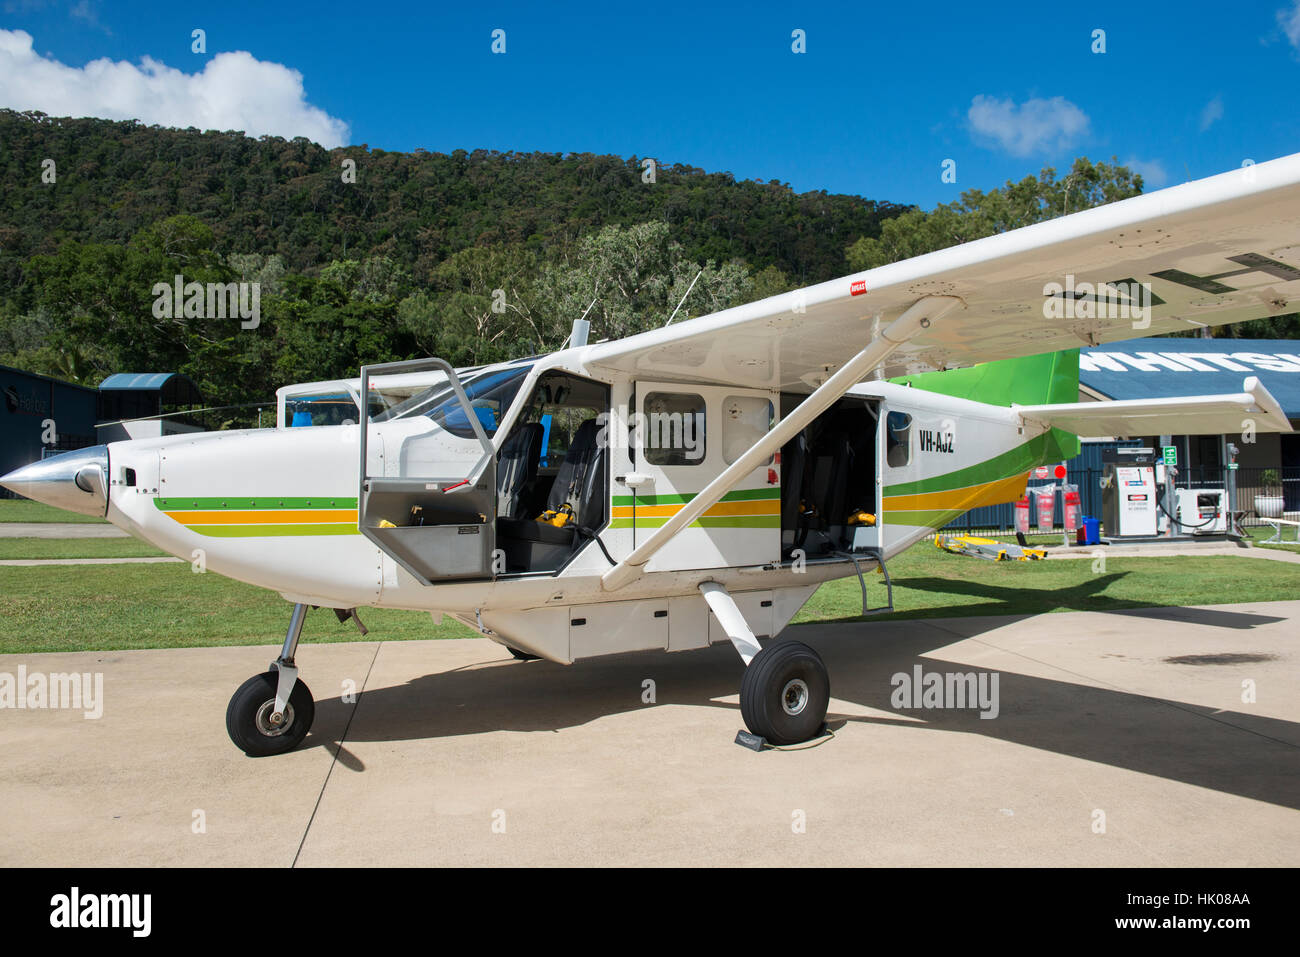 Airplane for scenic flights at the airport in Airlie Beach, Queensland Australia Stock Photo